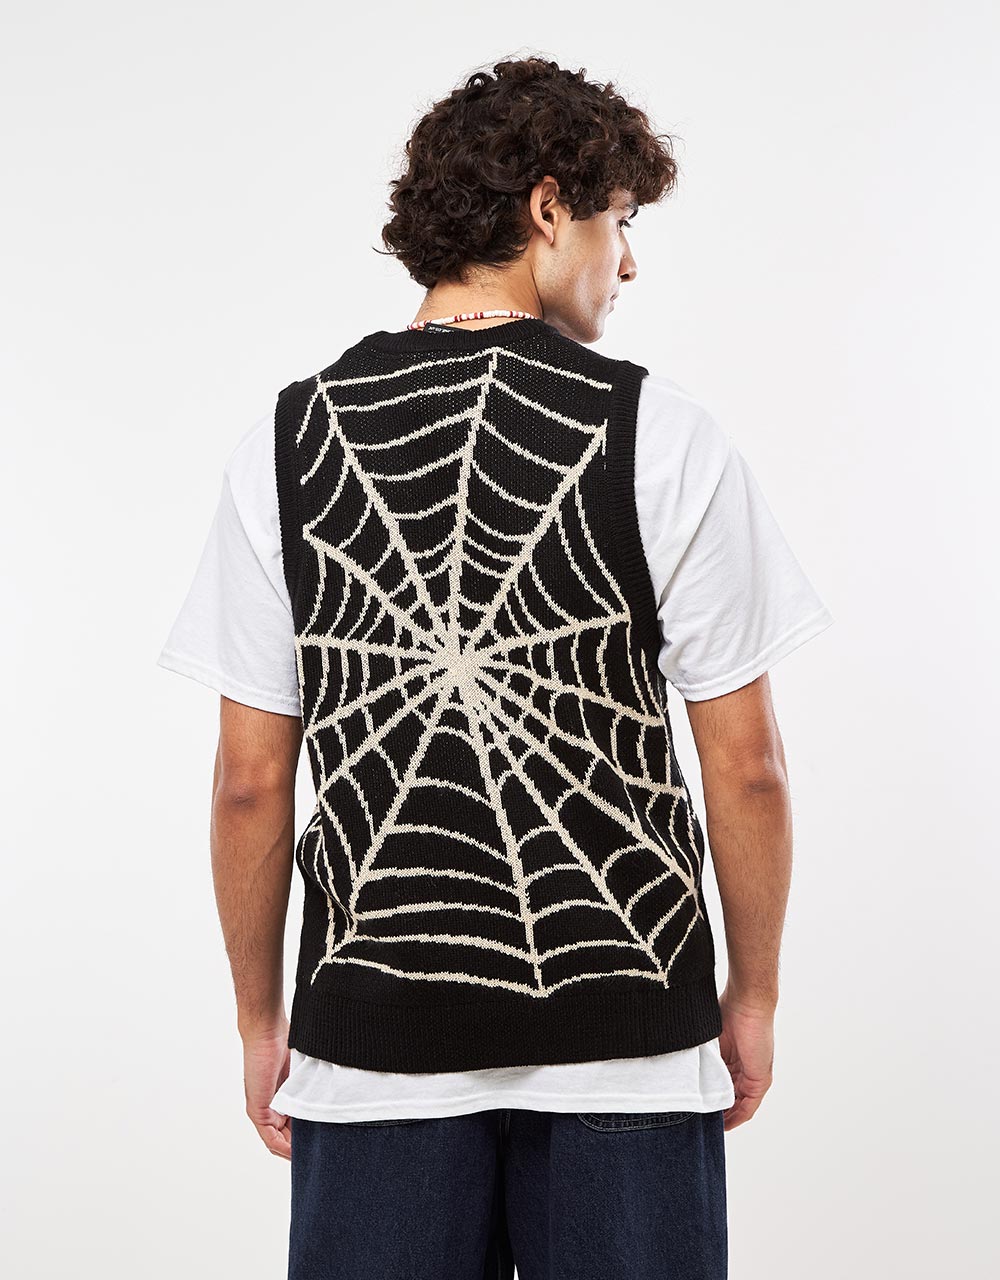 Route One Spiderweb Knitted Vest - Black